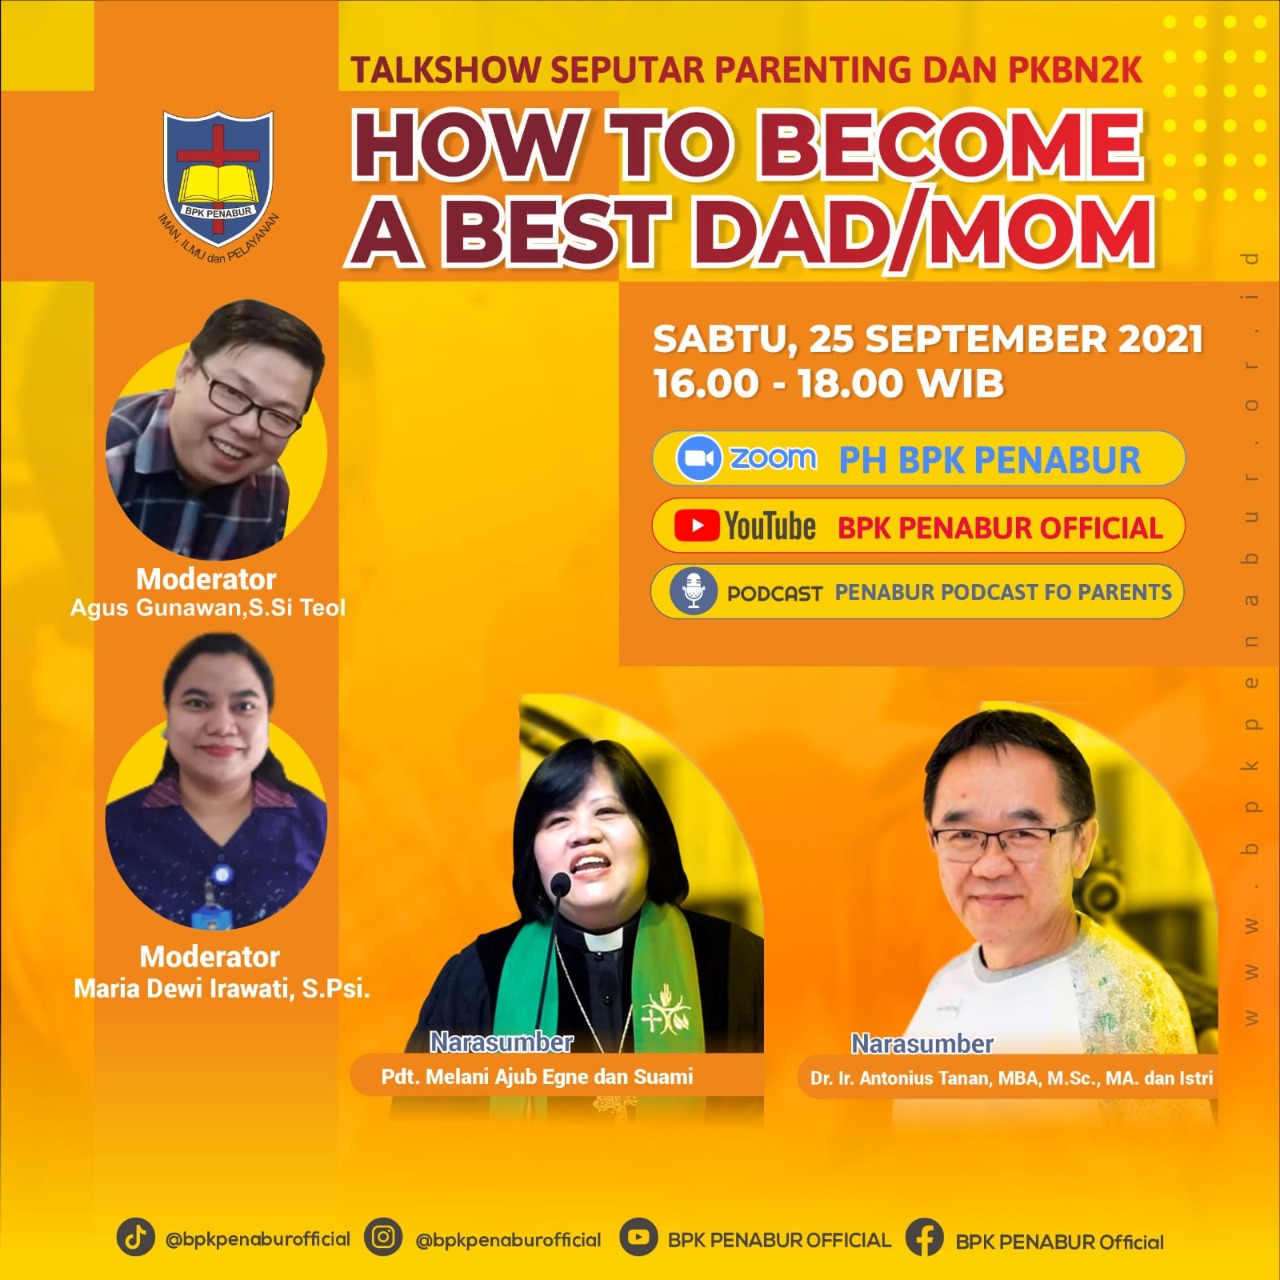 How To Become A Best Dad and Mom